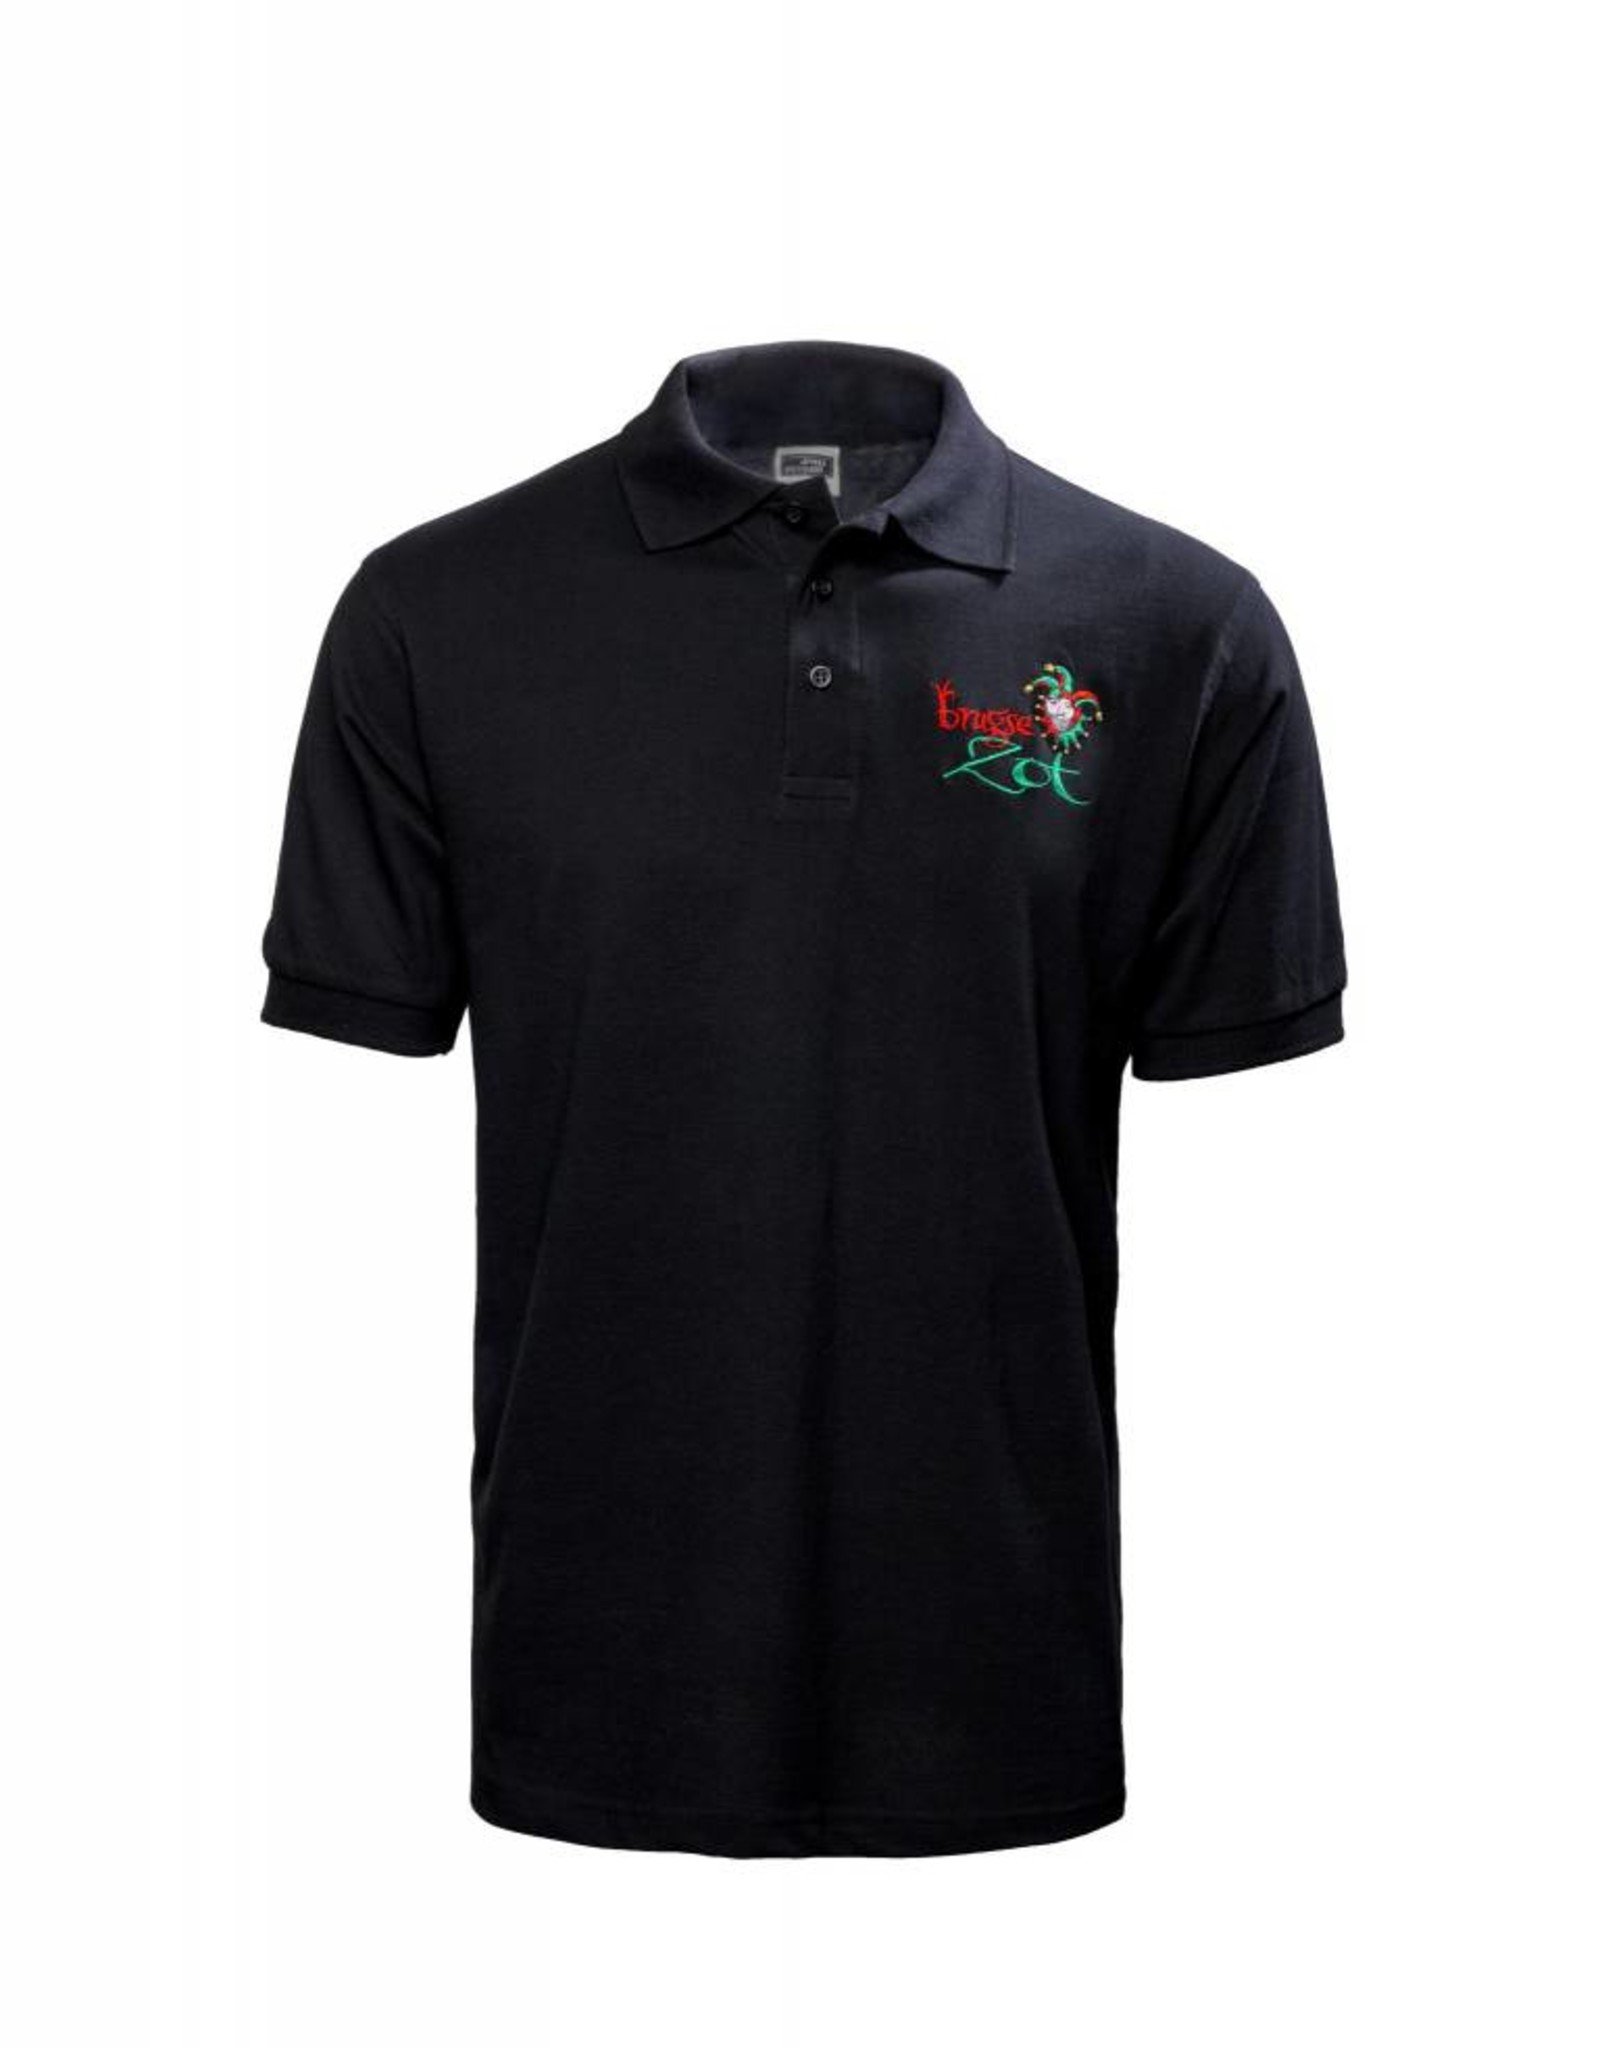 Brugse Zot polo homme